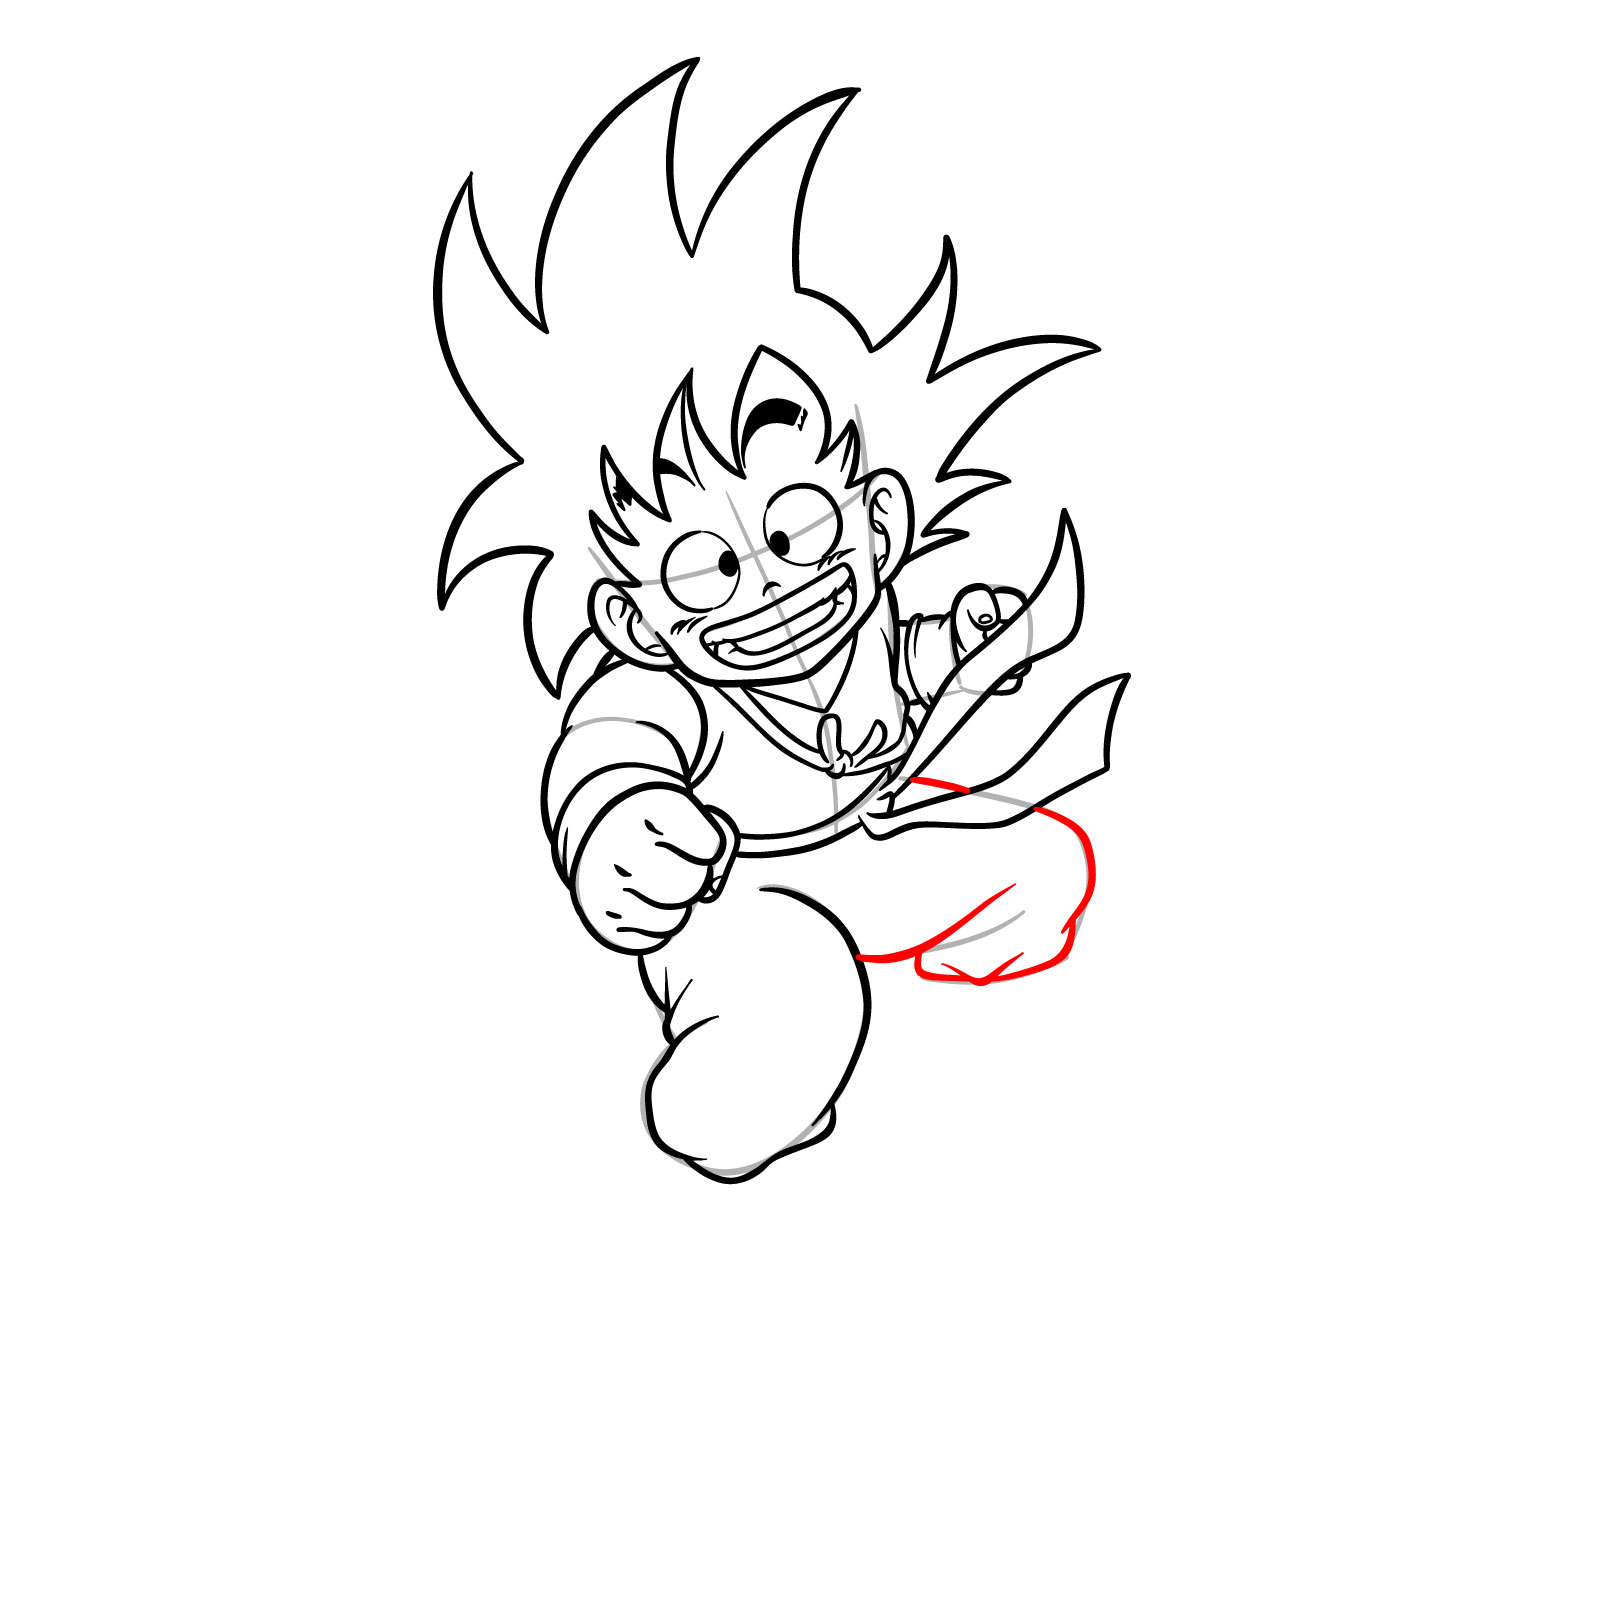 How to draw Kid Goku riding on the Flying Nimbus - step 20